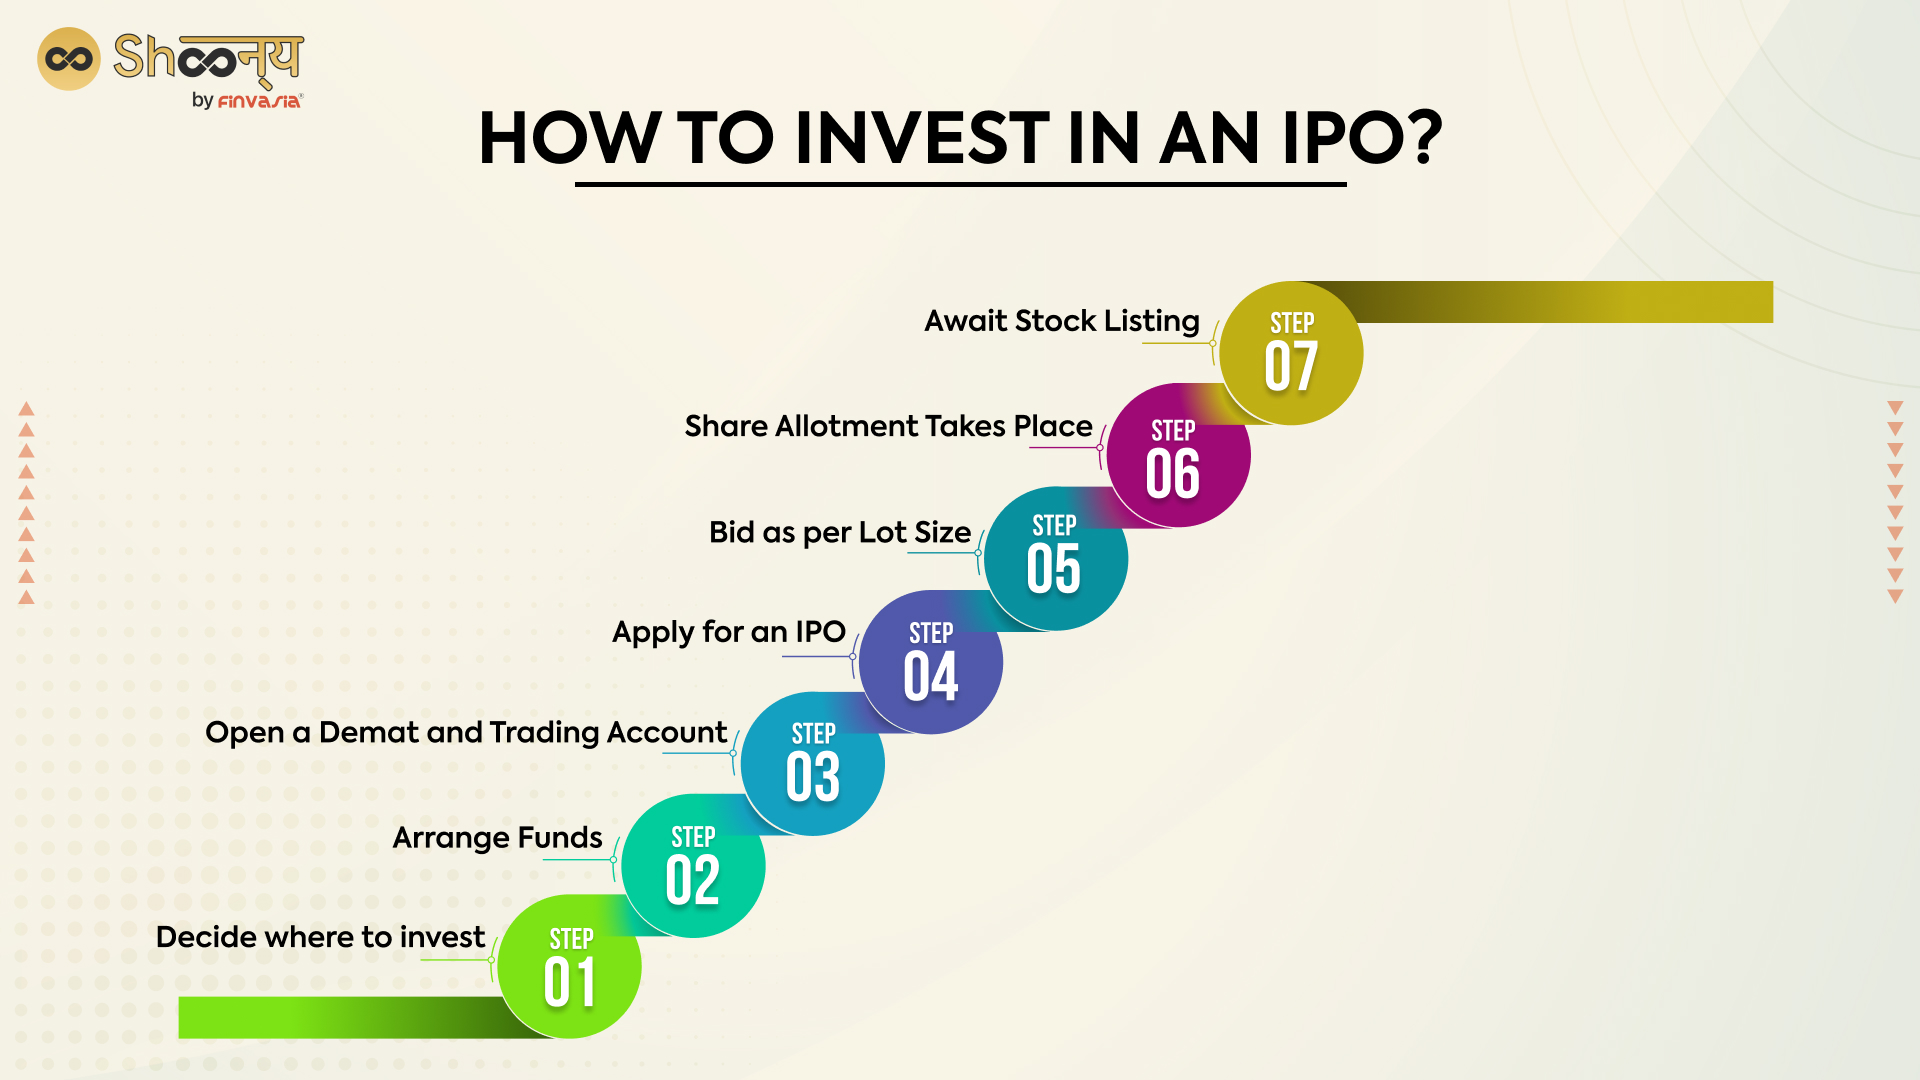 How to Invest in an IPO?